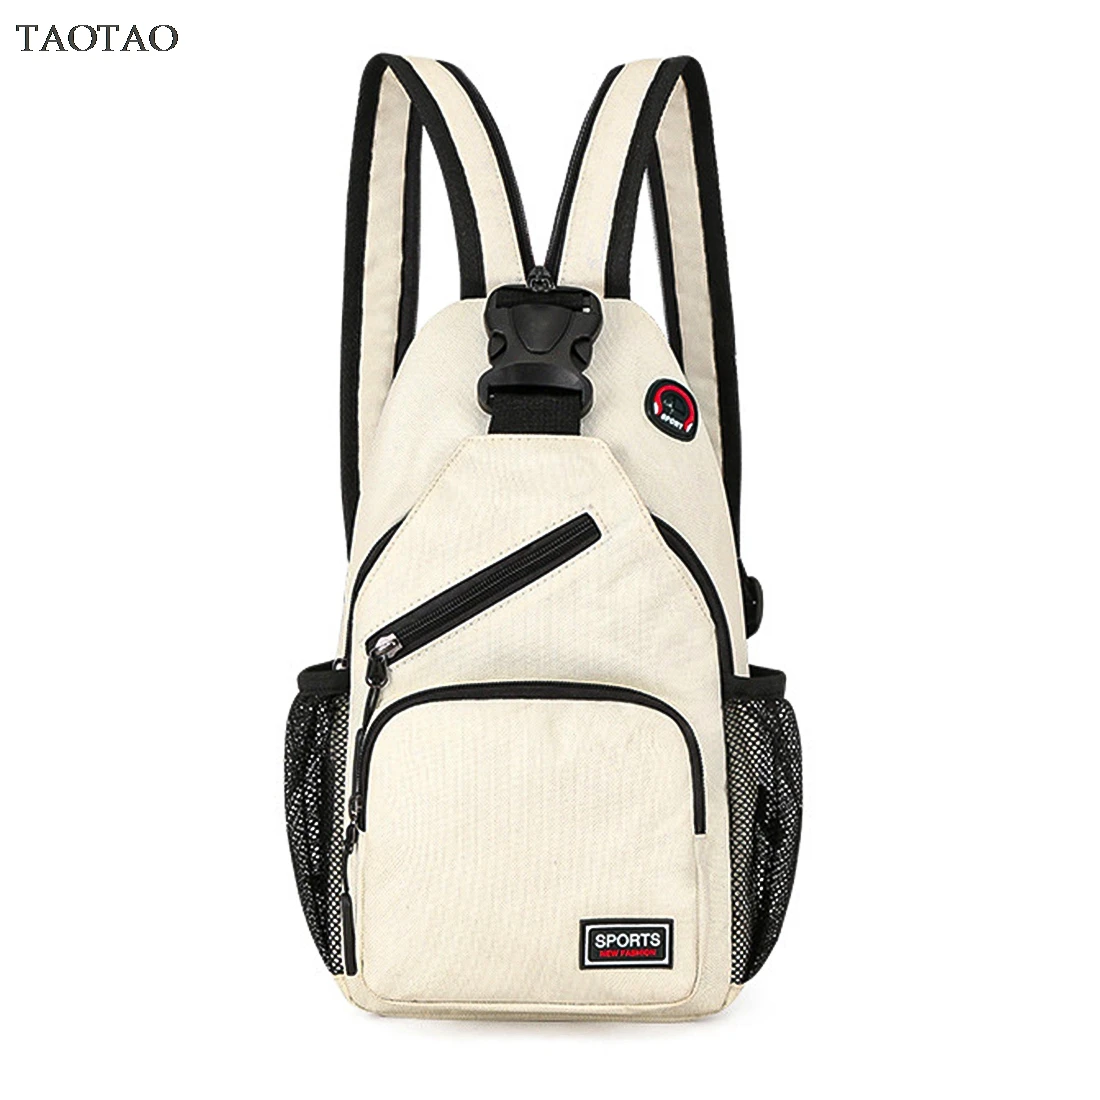 

2021Casual Women Small Backpack Girls Chest Bag with Earphone Hole Travel Packet Solid SMulti-Functional Rucksacks Mochila Mujer